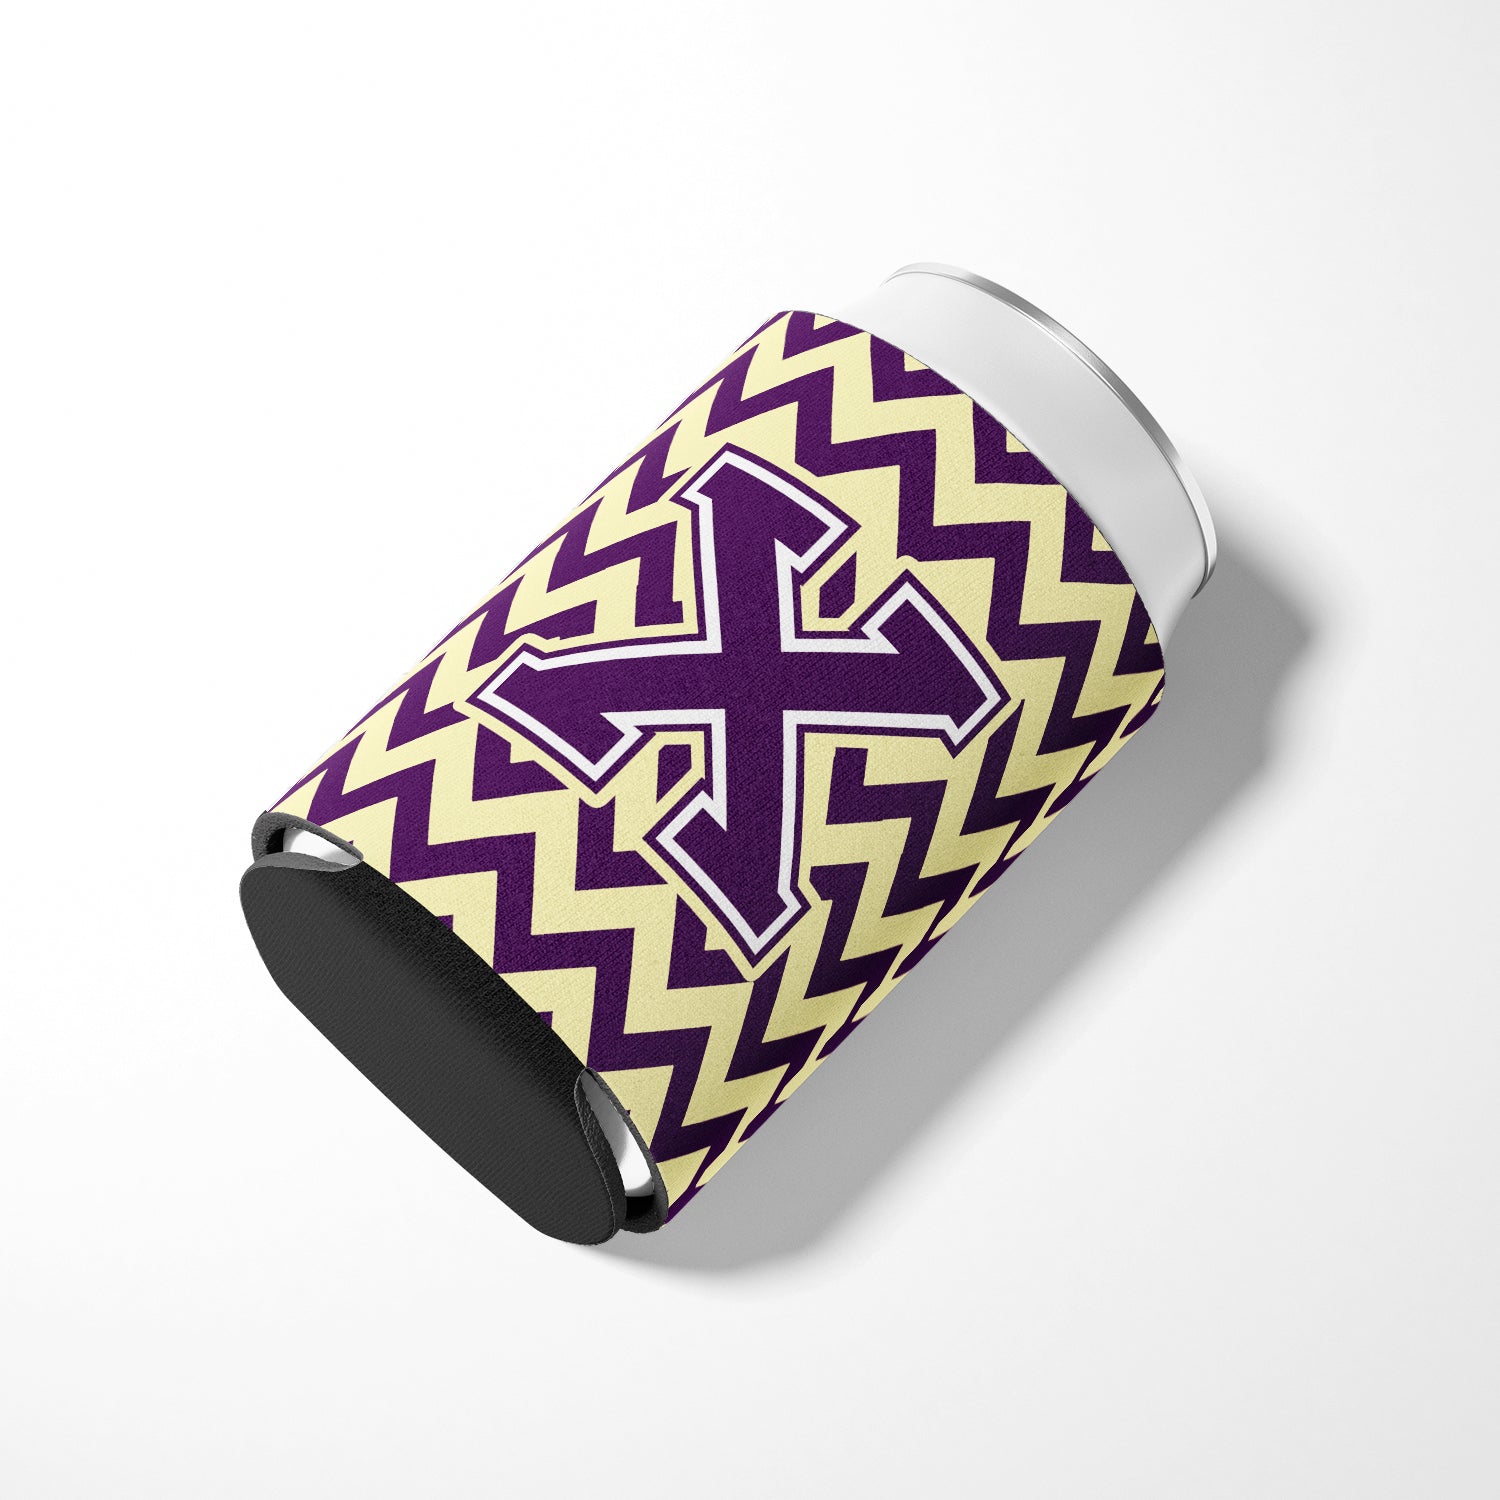 Letter X Chevron Purple and Gold Can or Bottle Hugger CJ1058-XCC.